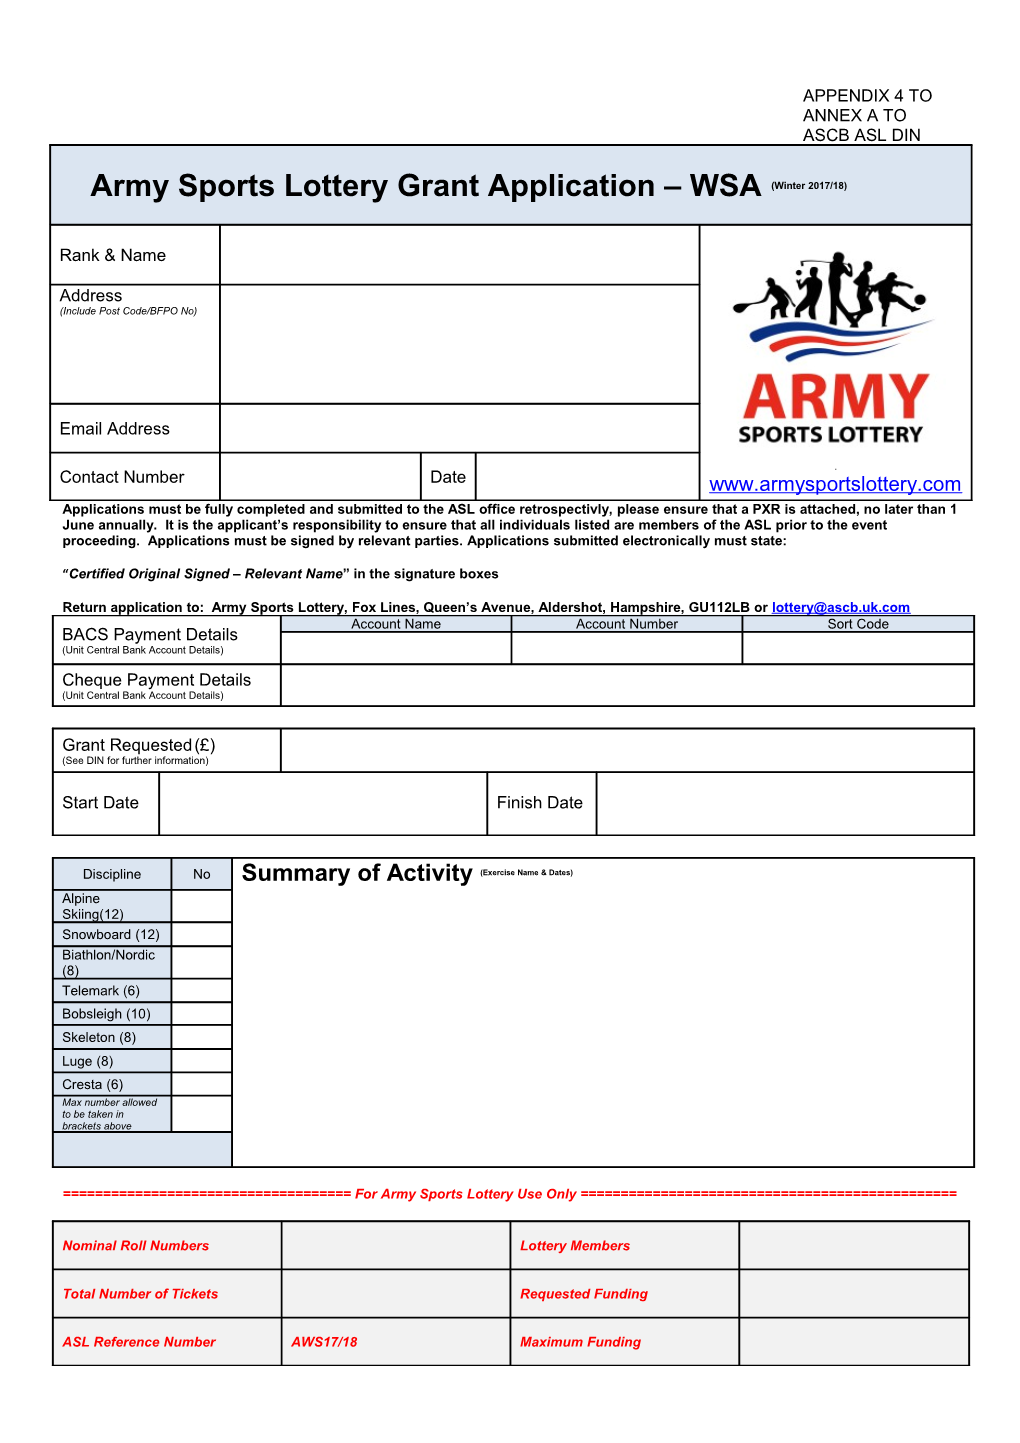 Army Sports Lottery Grant Application